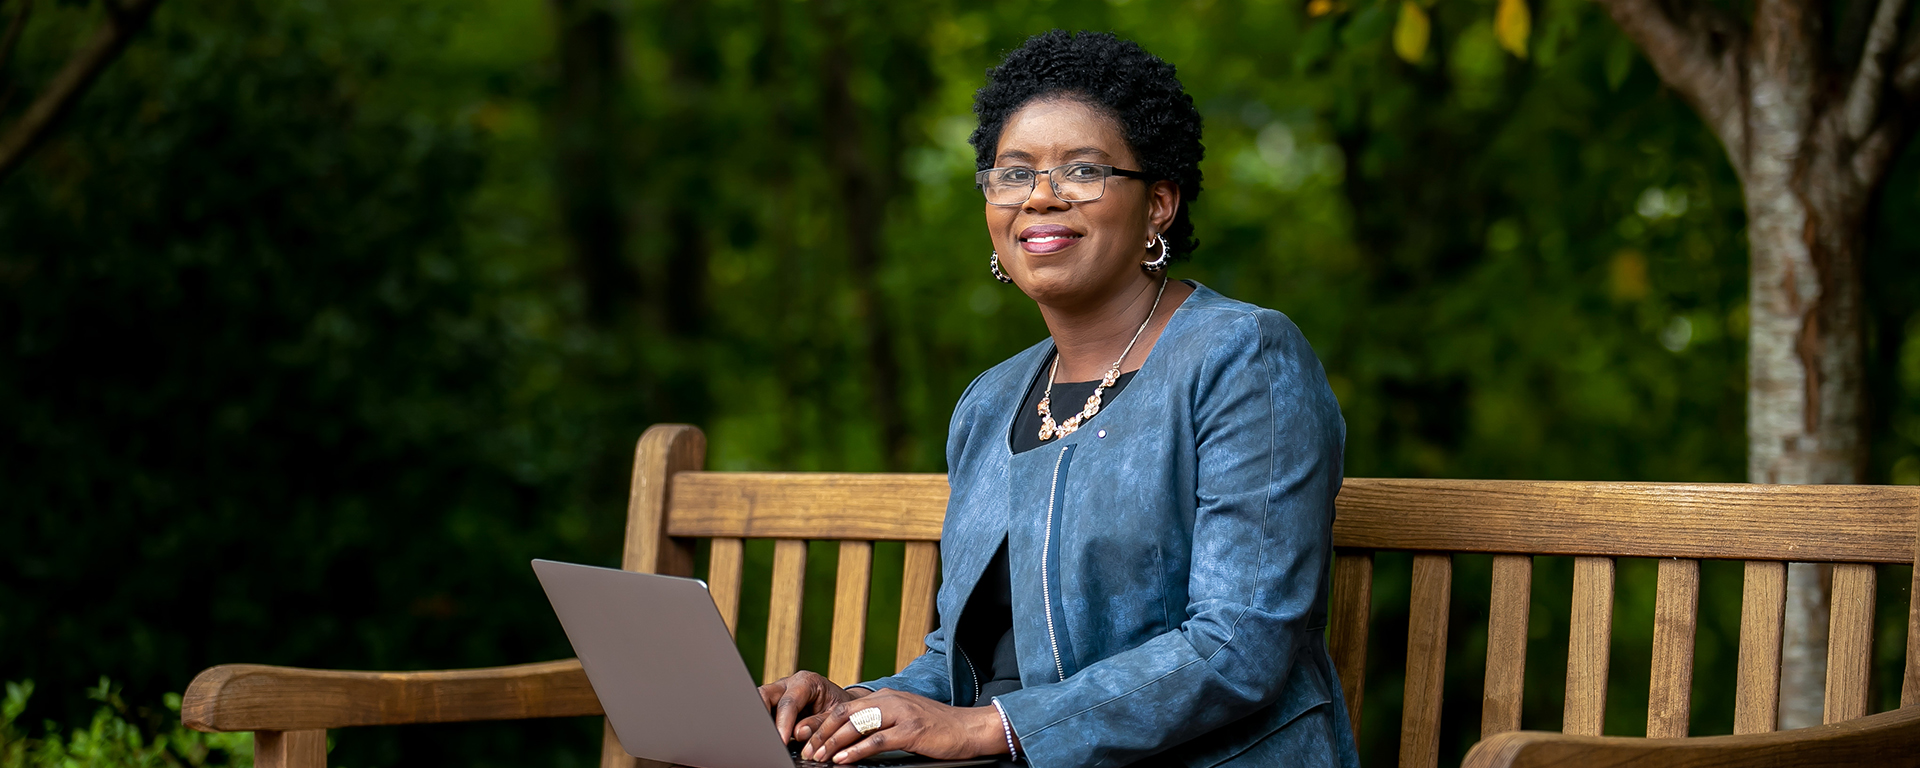 Capital One leader Maureen sits on a bench and smiles with her laptop